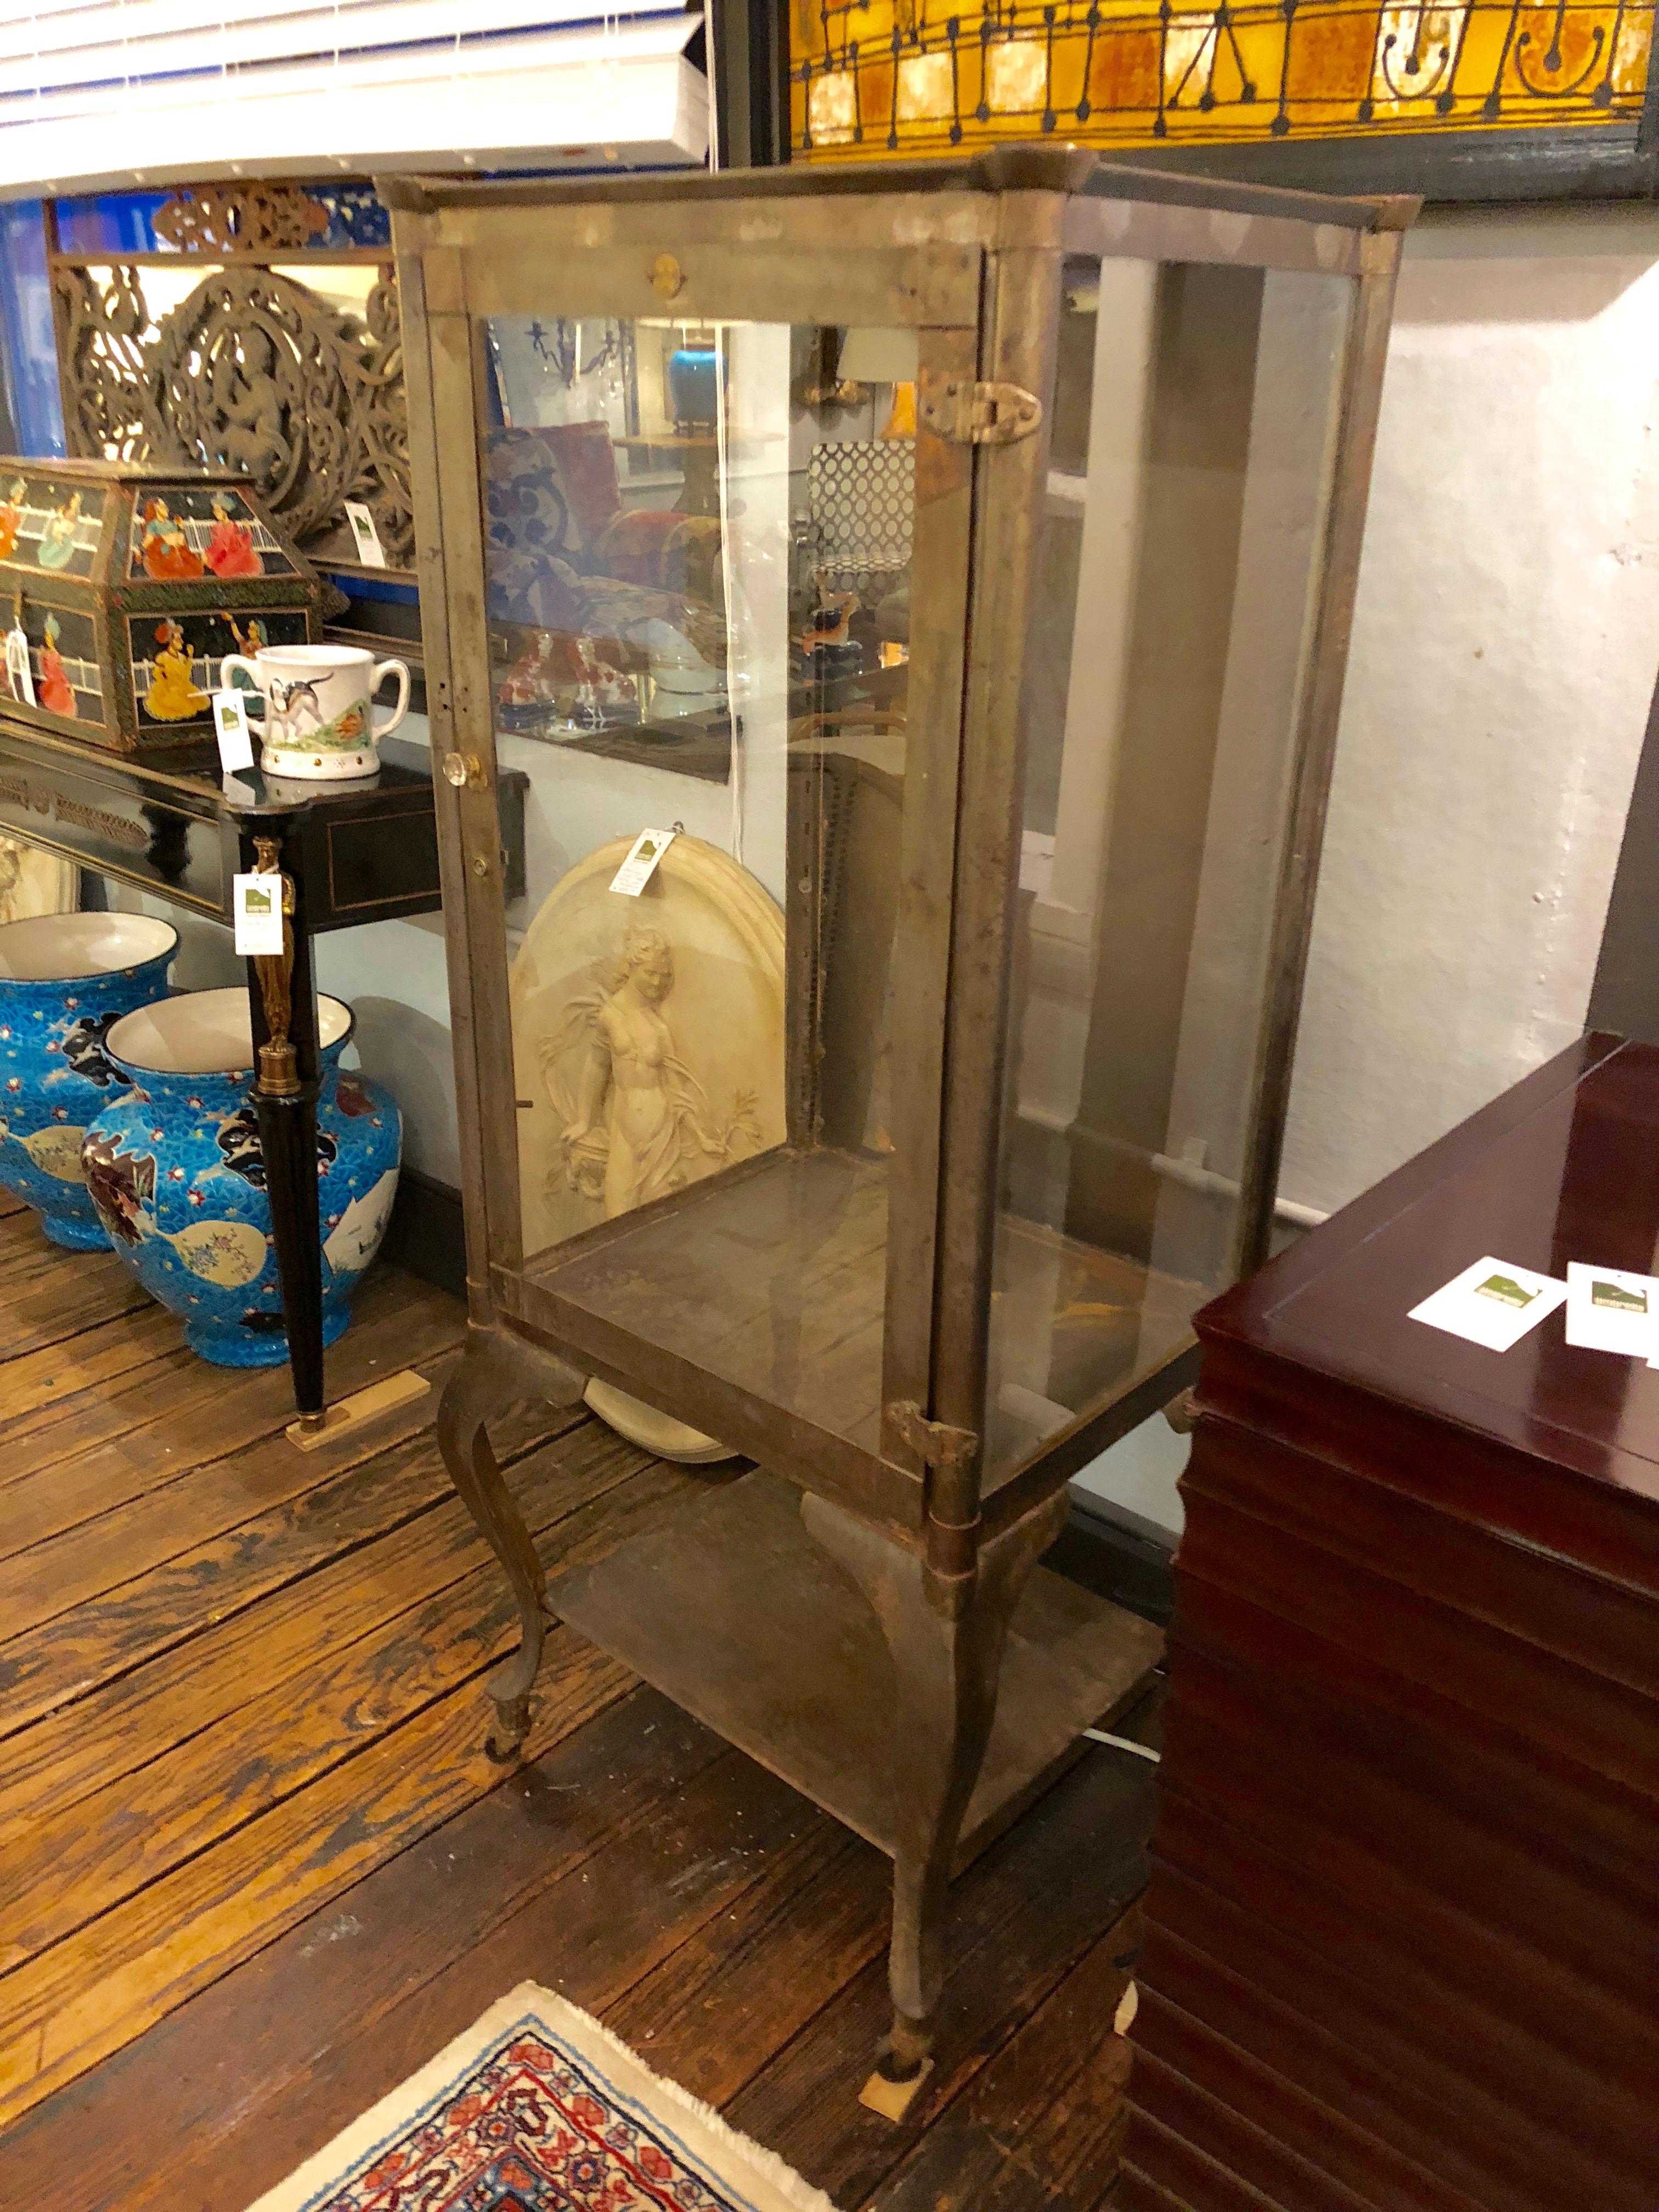 A rare find in a medicine cabinet having stripped grey steel and original glass on front and sides, with elegant curvy cabriole legs on casters. 3 adjustable glass shelves. Brass medallion on the front.